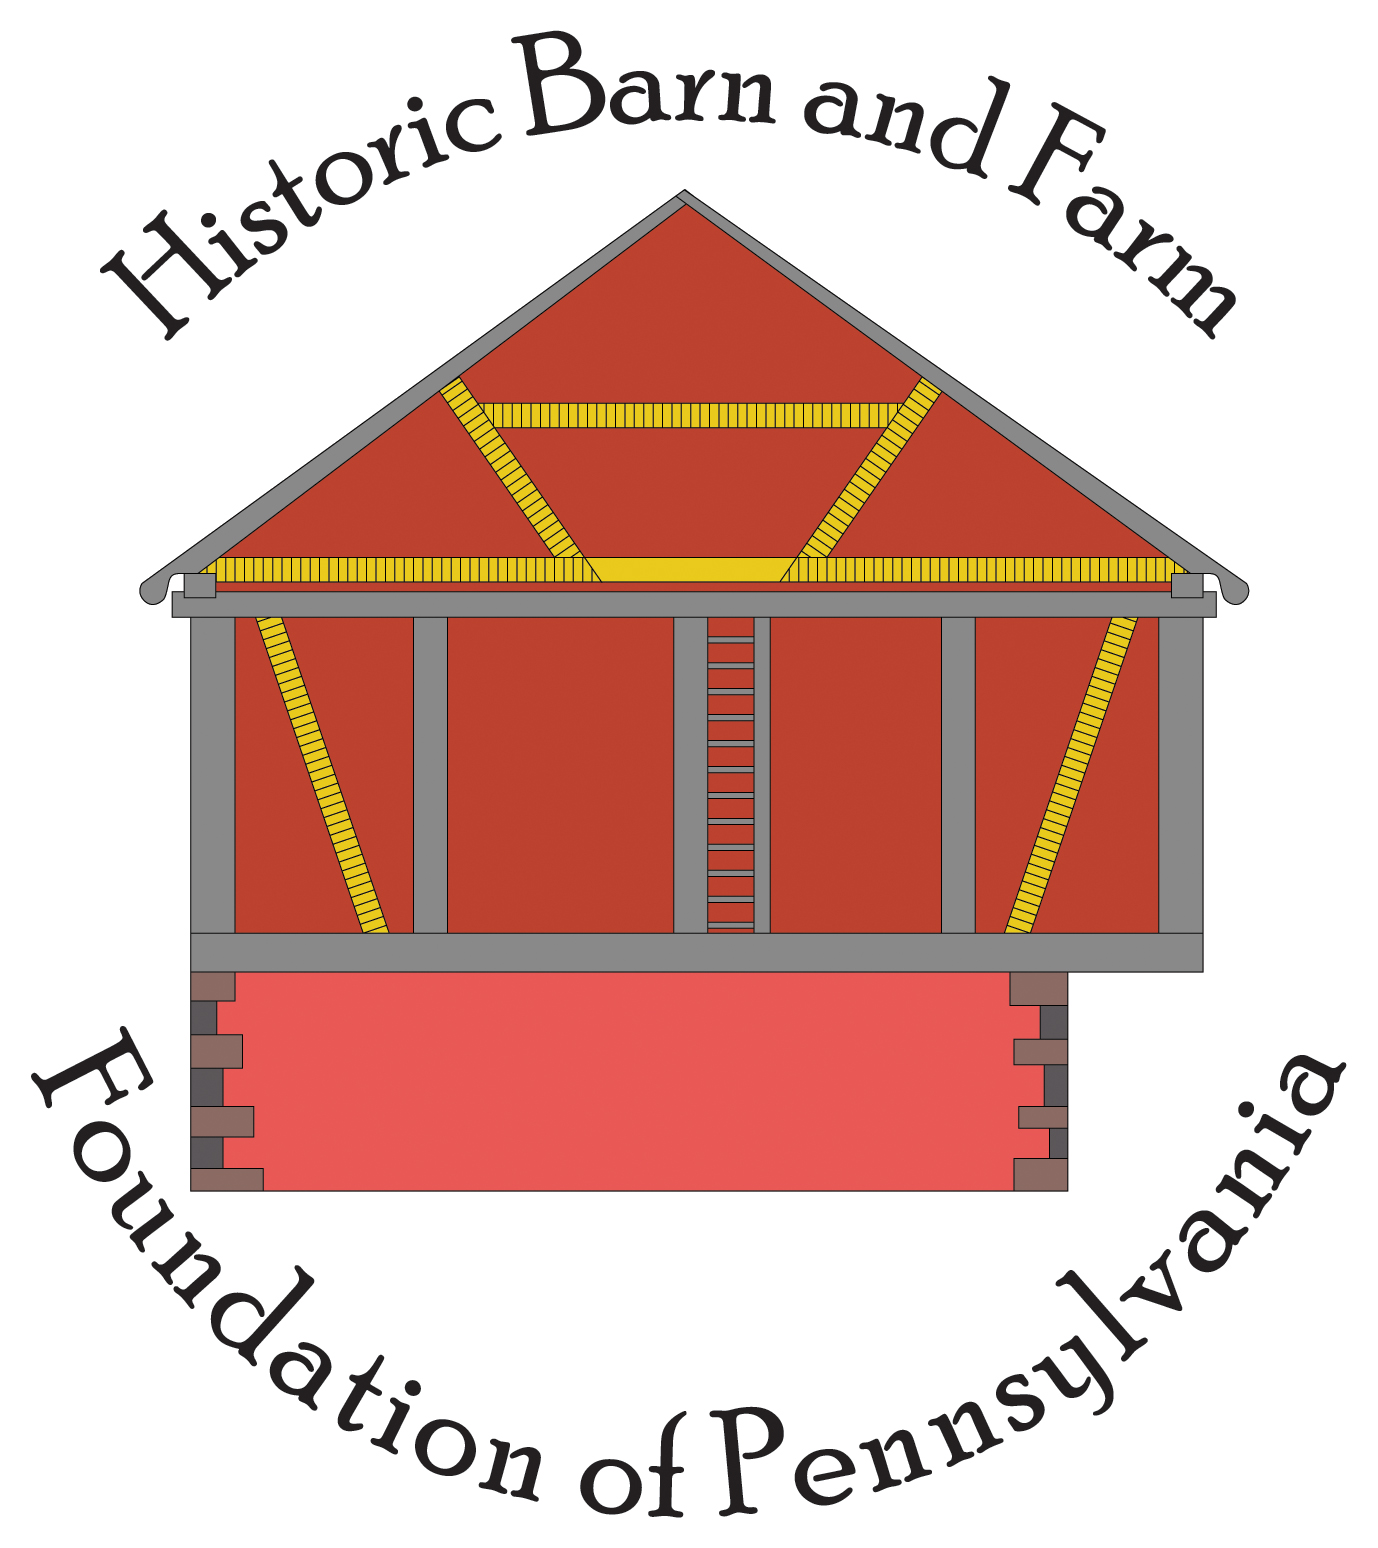 The Historic Barn and Farm Foundation logo, which features a barn vector